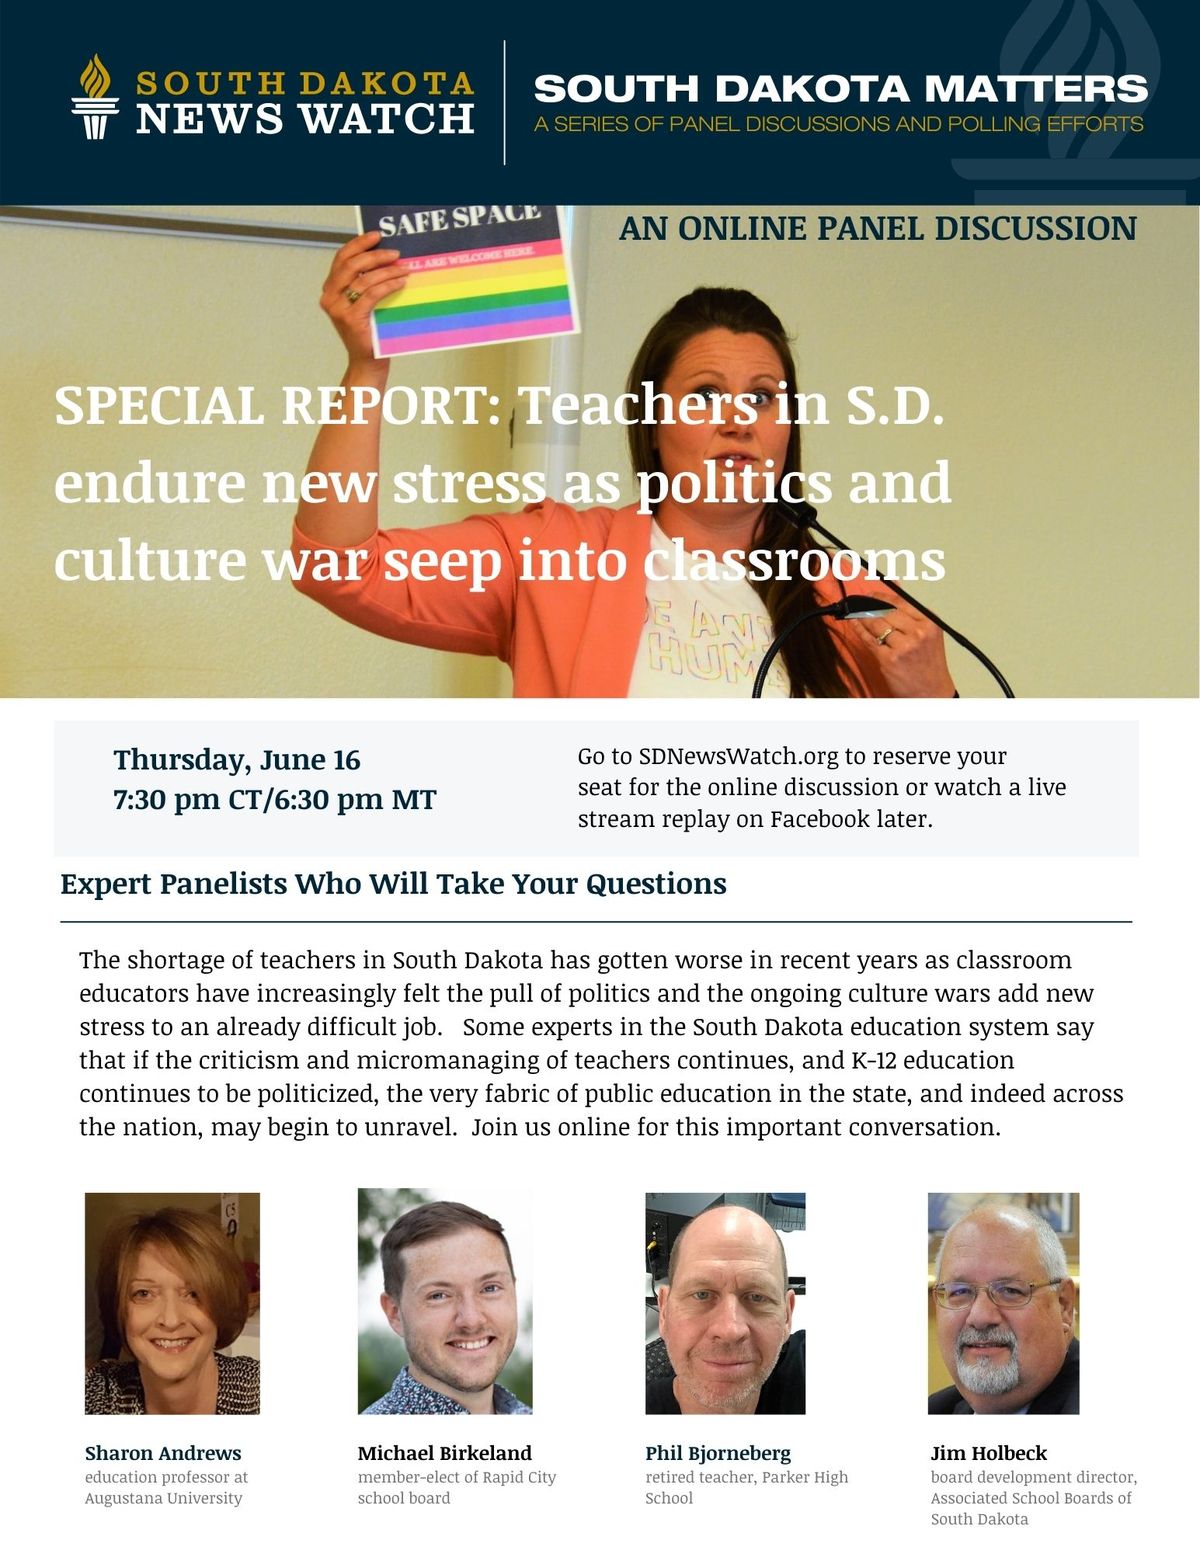 Panel discussion on politics and education set for Thursday, June 16, 2022